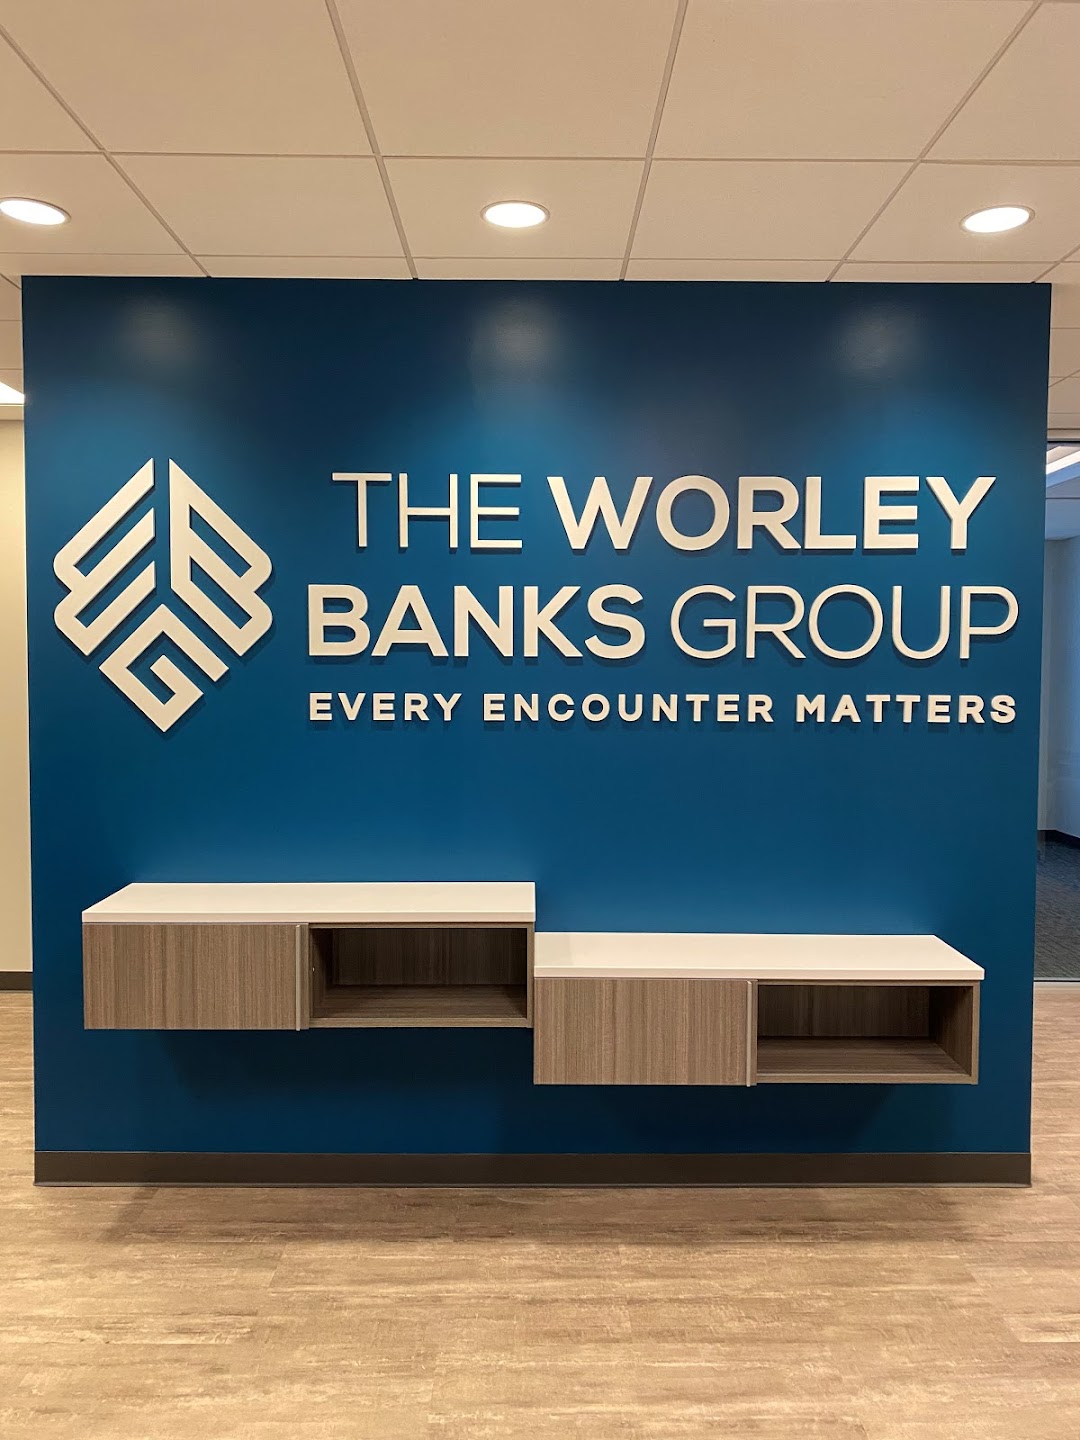 The Worley Banks Group